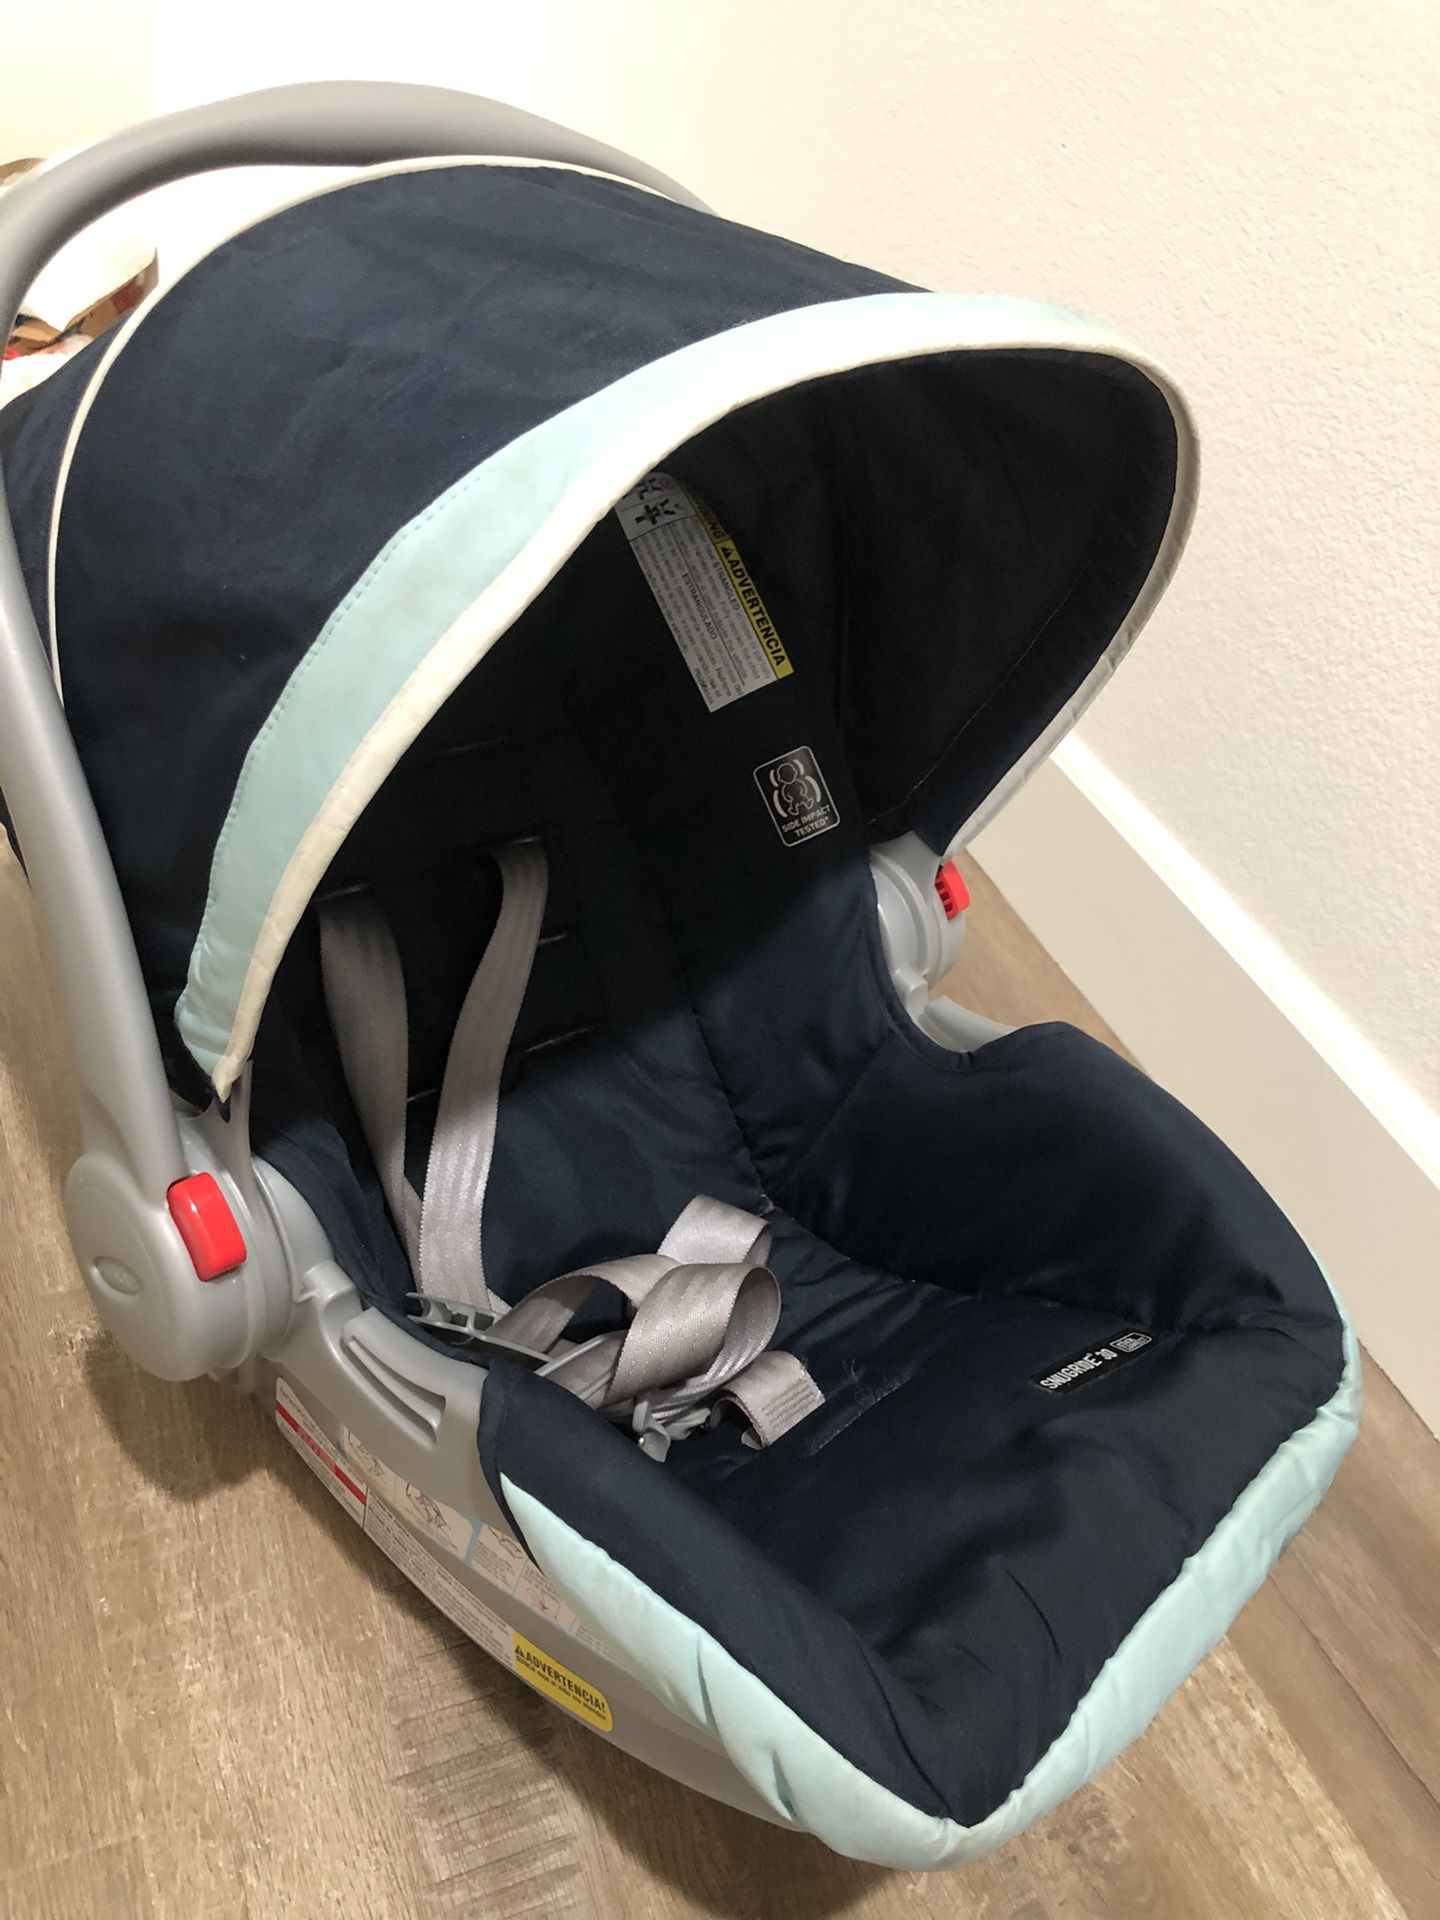 Graco Car seat / carseat with base infant baby material